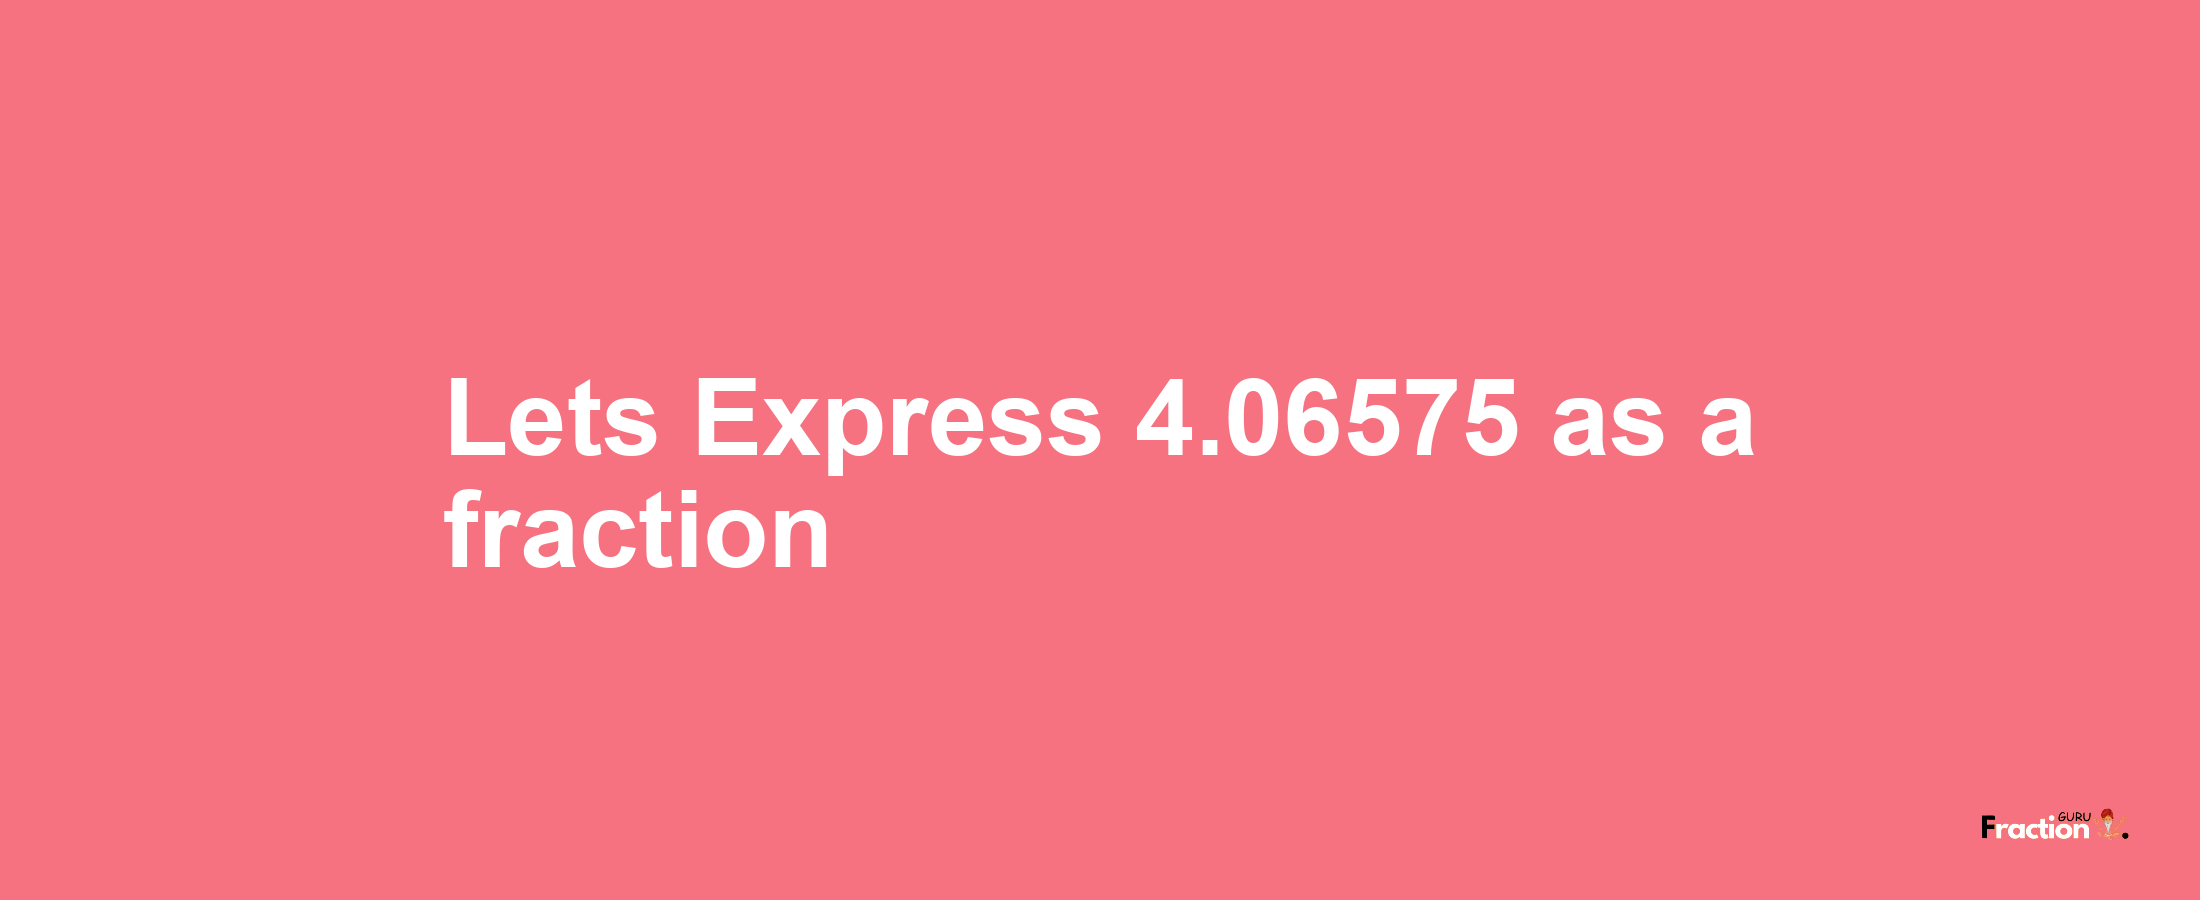 Lets Express 4.06575 as afraction